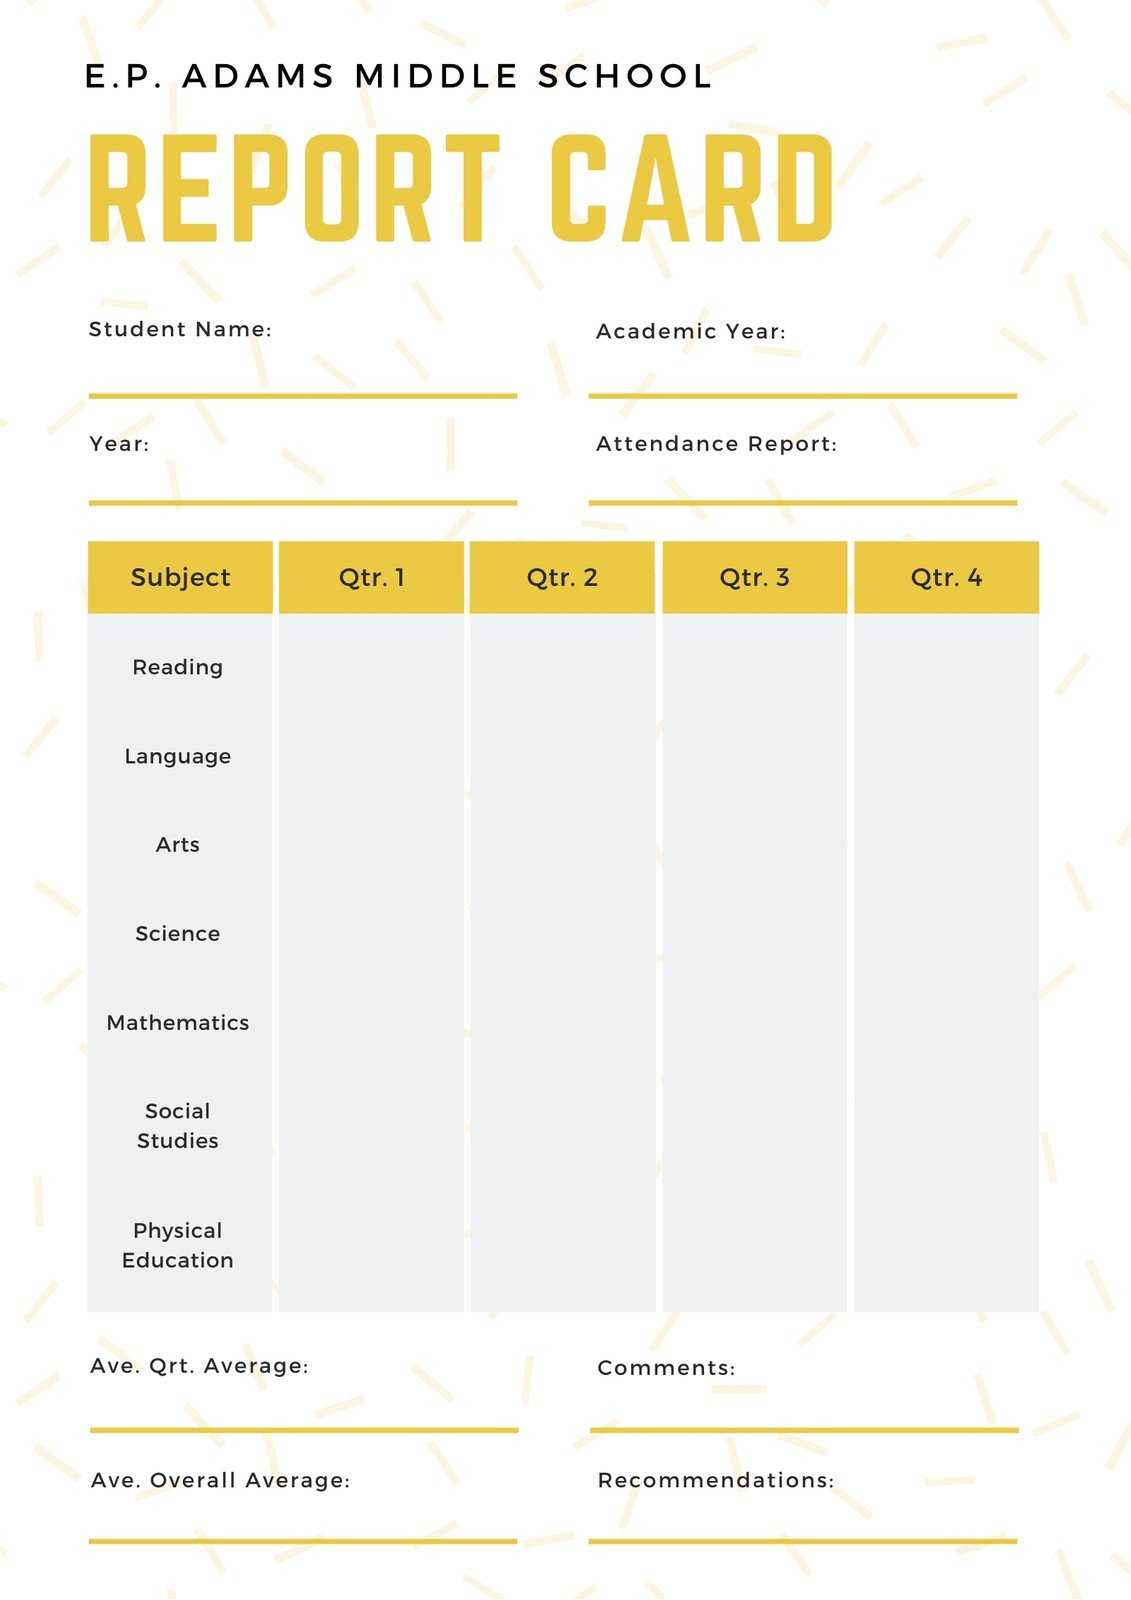 White And Yellow Simple Sprinkled Middle School Report Card For Boyfriend Report Card Template